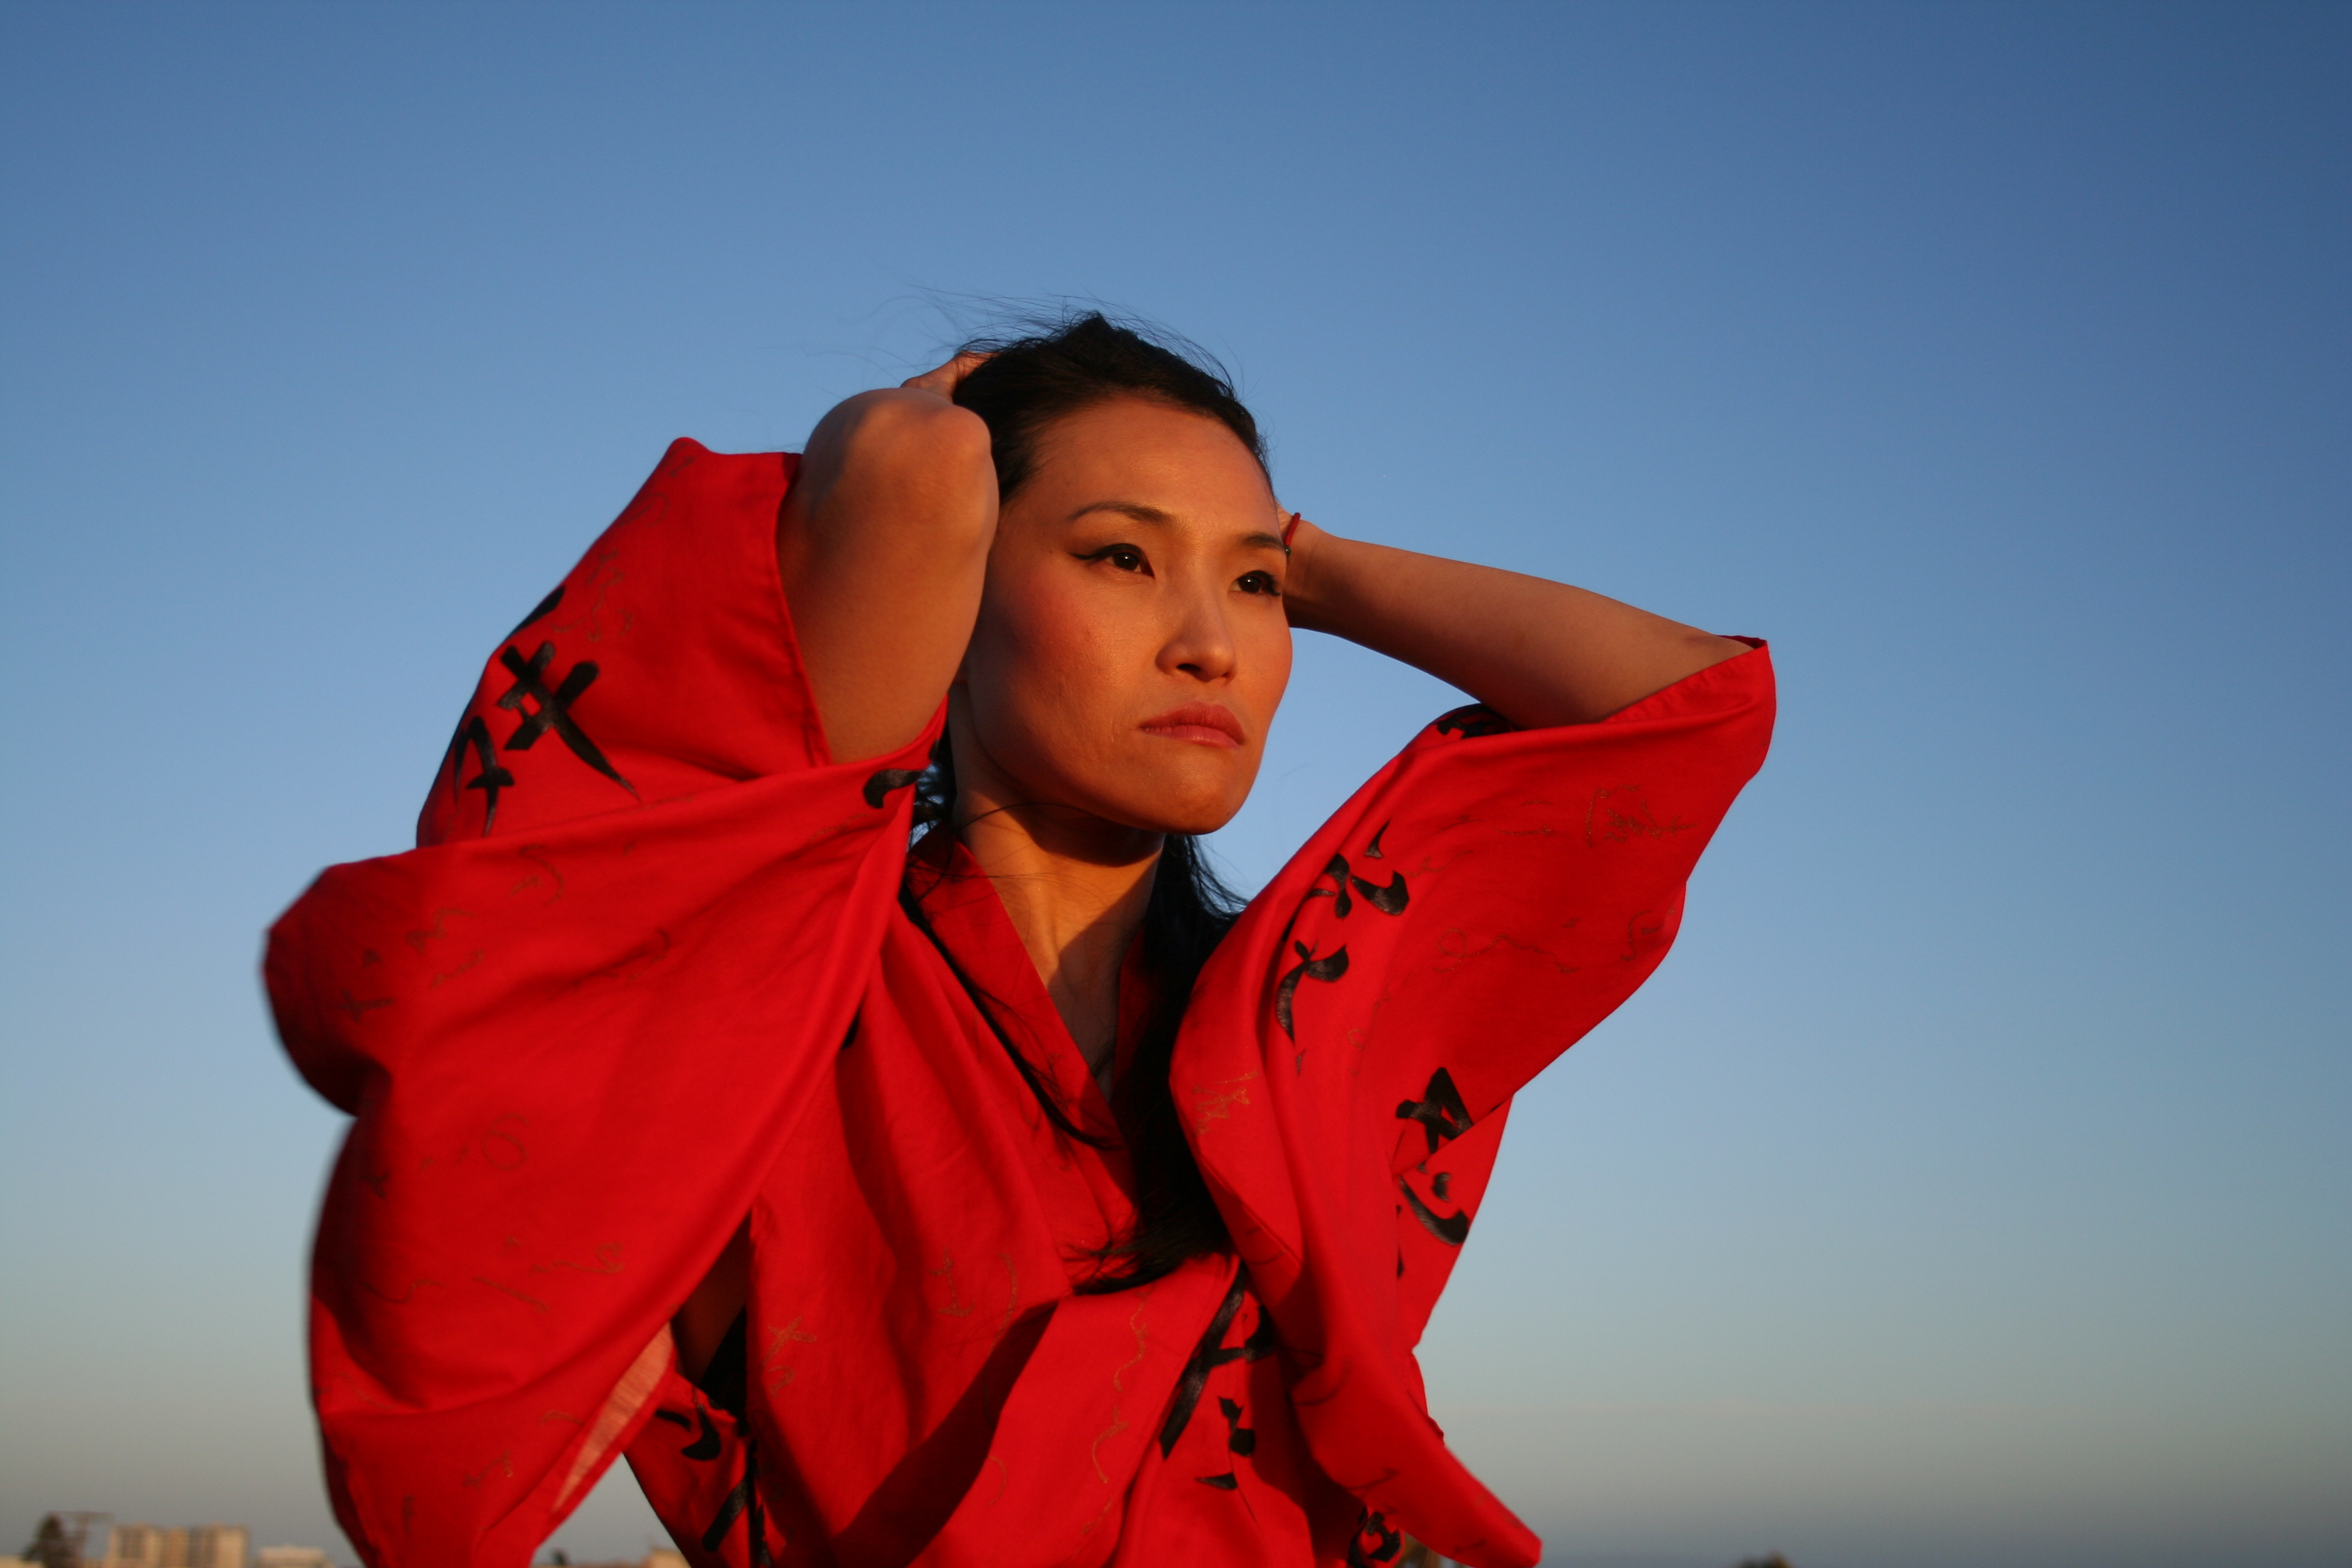 Hollywood Sunset on Venice Protagonist Chinese High Priestess Actress Lai Peng Chan for Engraved TV series Venice Beach LA